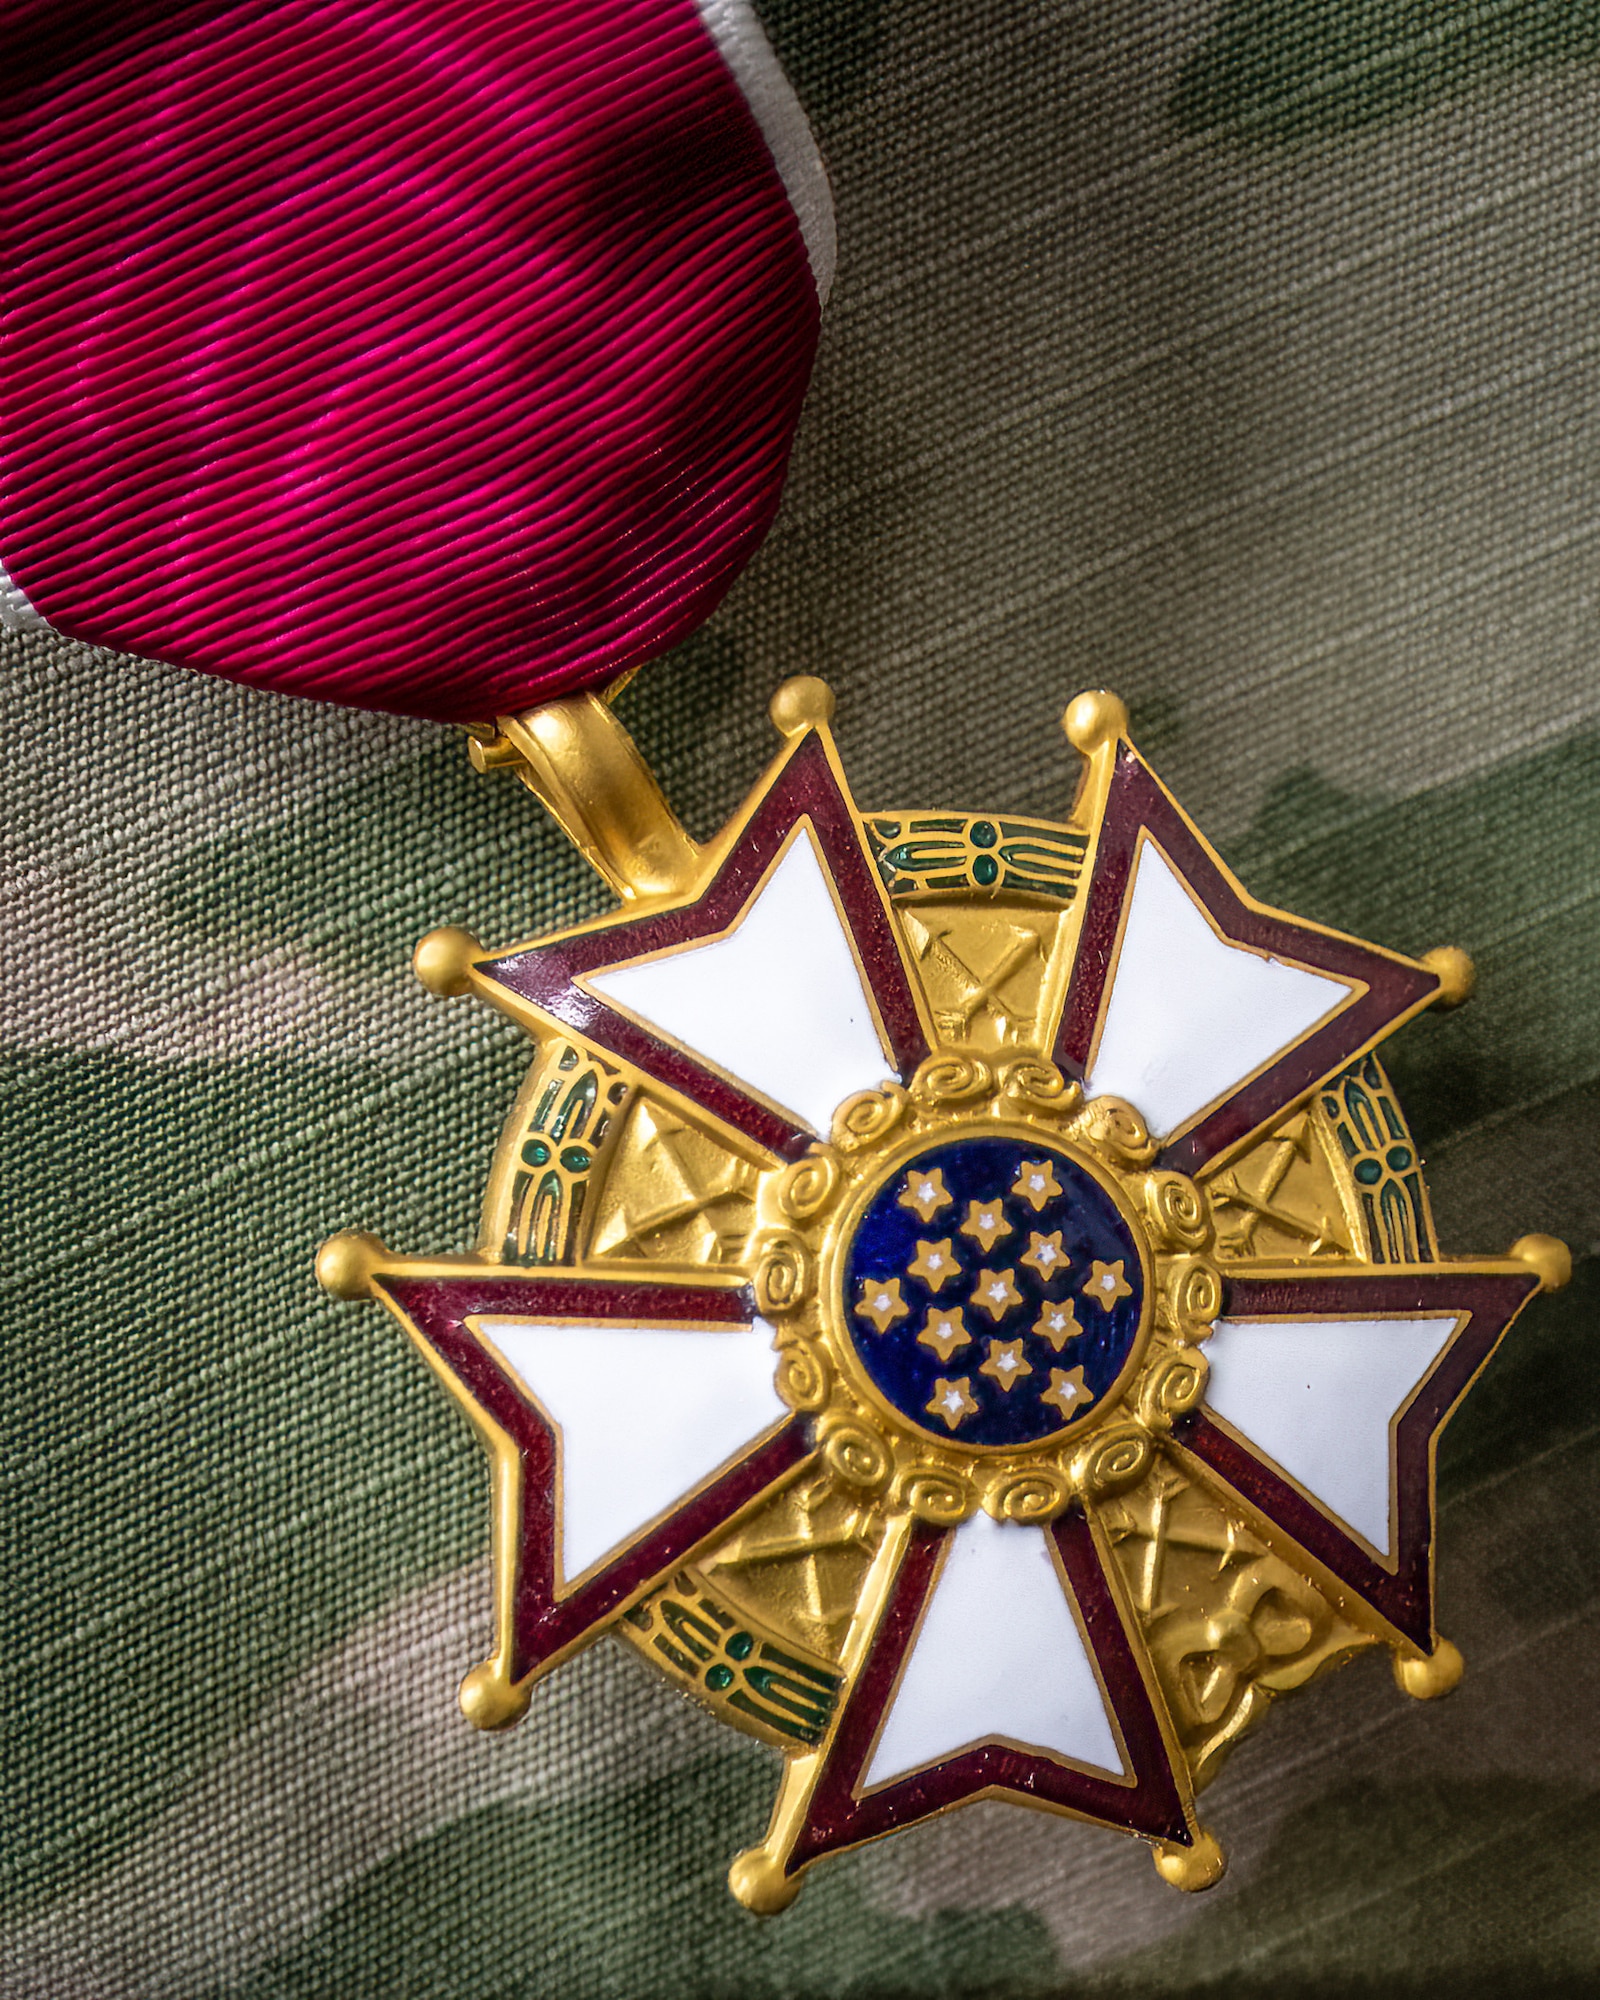 The Legion of Merit is conferred to military members who have distinguished themselves by exceptionally meritorious conduct in the performance of outstanding services since Sept. 8, 1939, the date of the president's proclamation of the state of emergency that led to World War II. It was established by an Act of Congress of July 20, 1942, may be awarded for combat or noncombat services. (U.S. Air National Guard photo by Dale Greer)